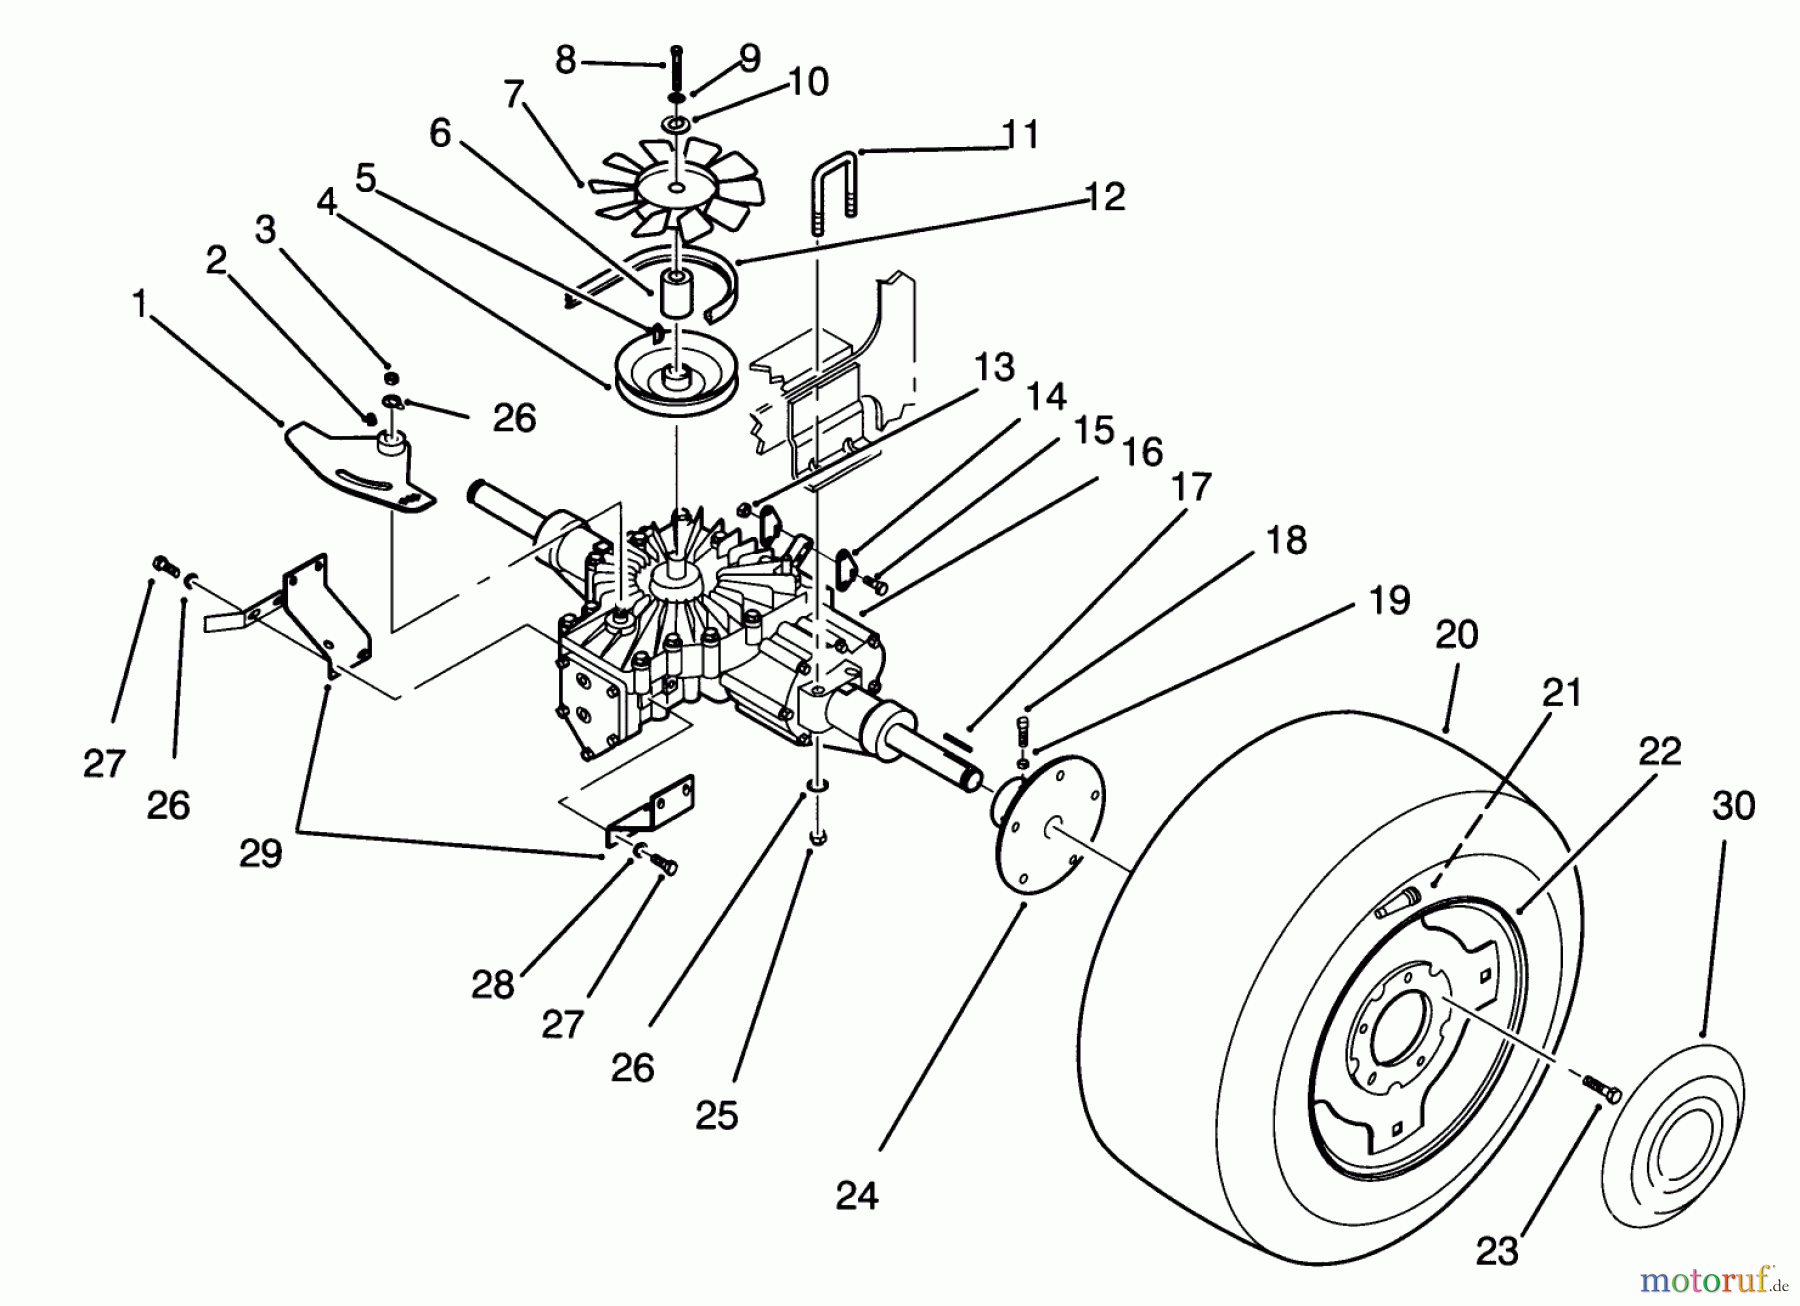  Toro Neu Mowers, Lawn & Garden Tractor Seite 1 72081 (246-H) - Toro 246-H Yard Tractor, 1993 (3900001-3999999) REAR WHEEL AND TRANSMISSION ASSEMBLY